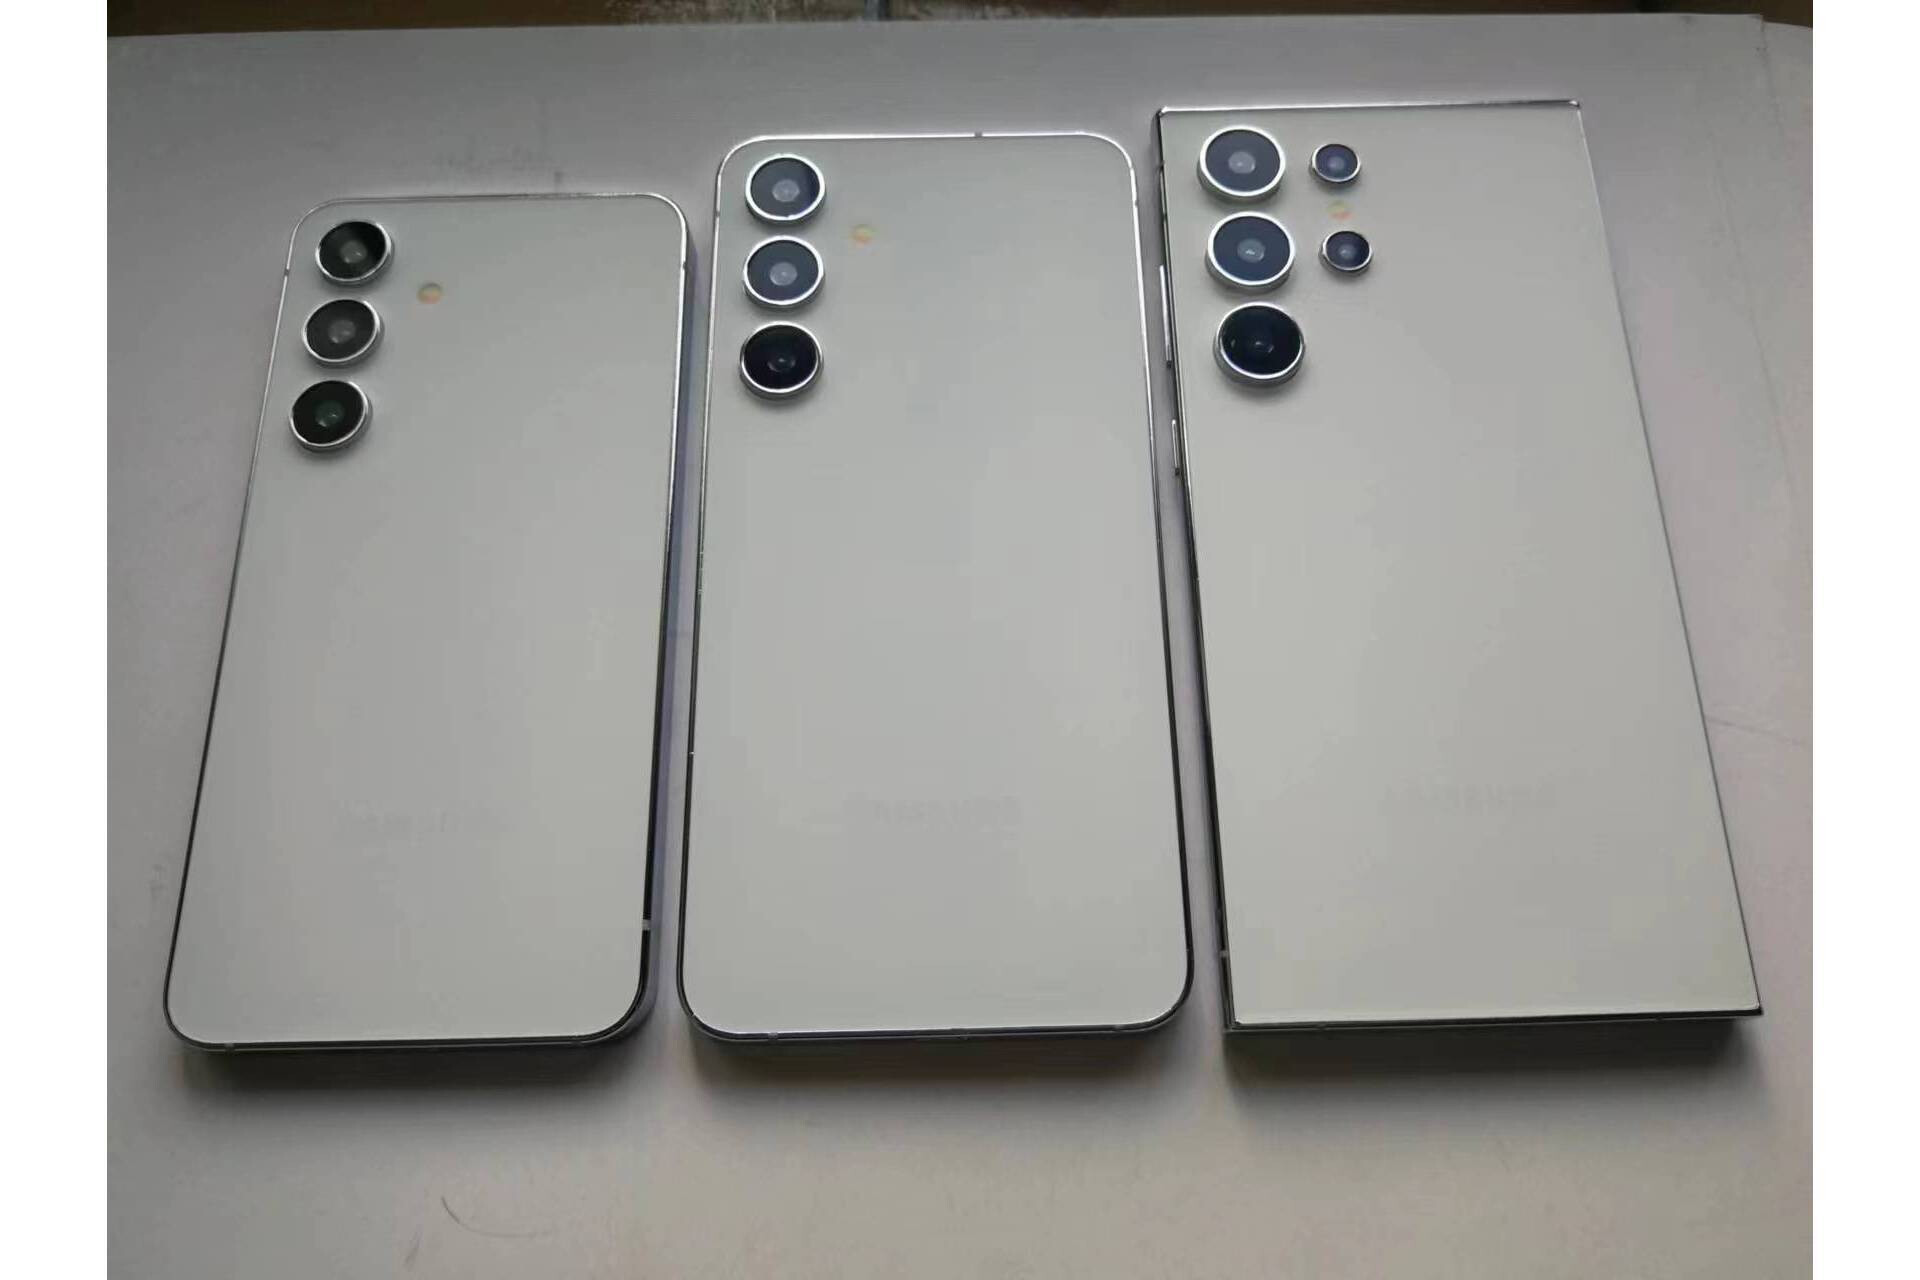 Galaxy S24 Family Dummy – Leak Gives First Full Look at Galaxy S24 Family Through Dummy Models